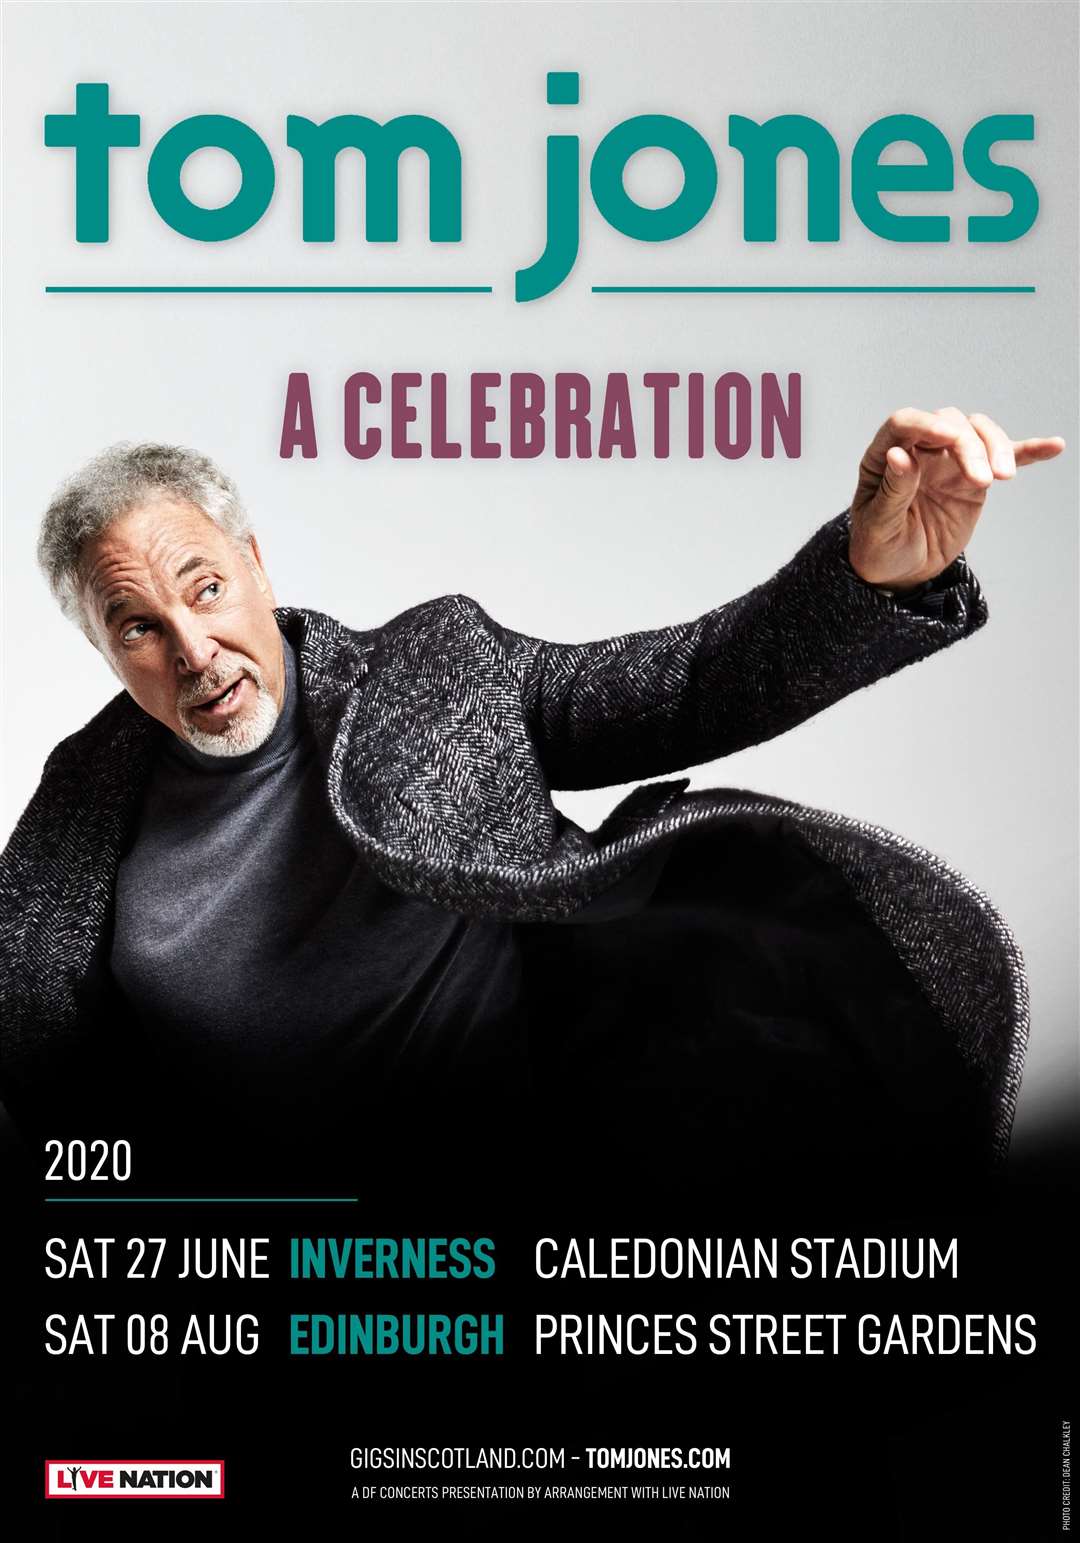 Sir Tom Jones is still set to perform in Inverness on June 27.